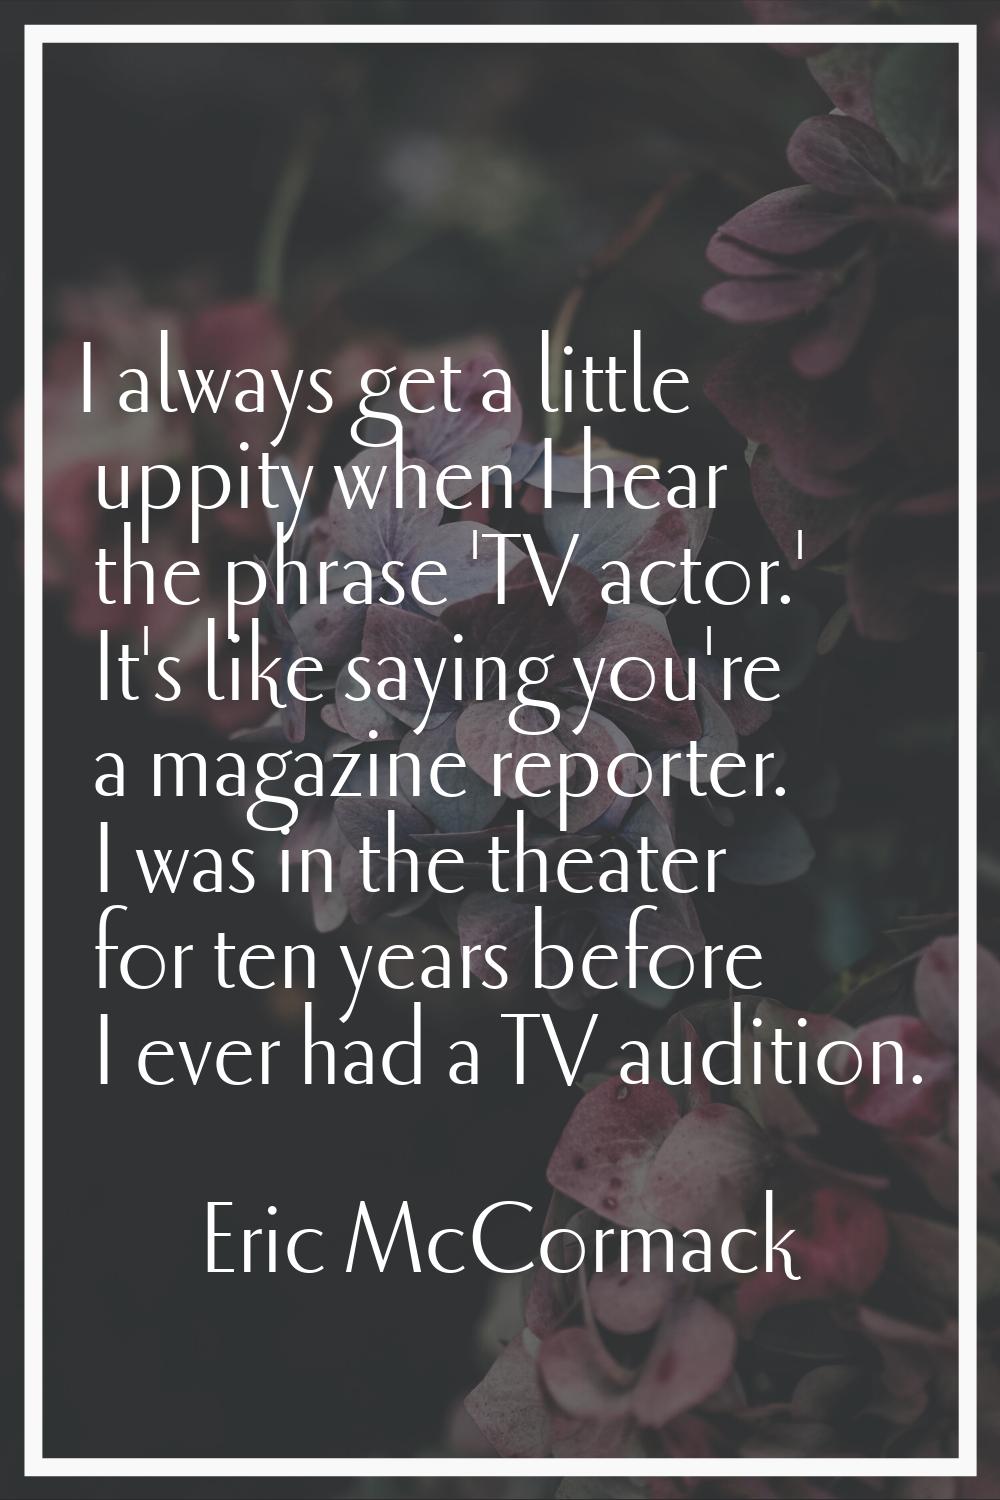 I always get a little uppity when I hear the phrase 'TV actor.' It's like saying you're a magazine 